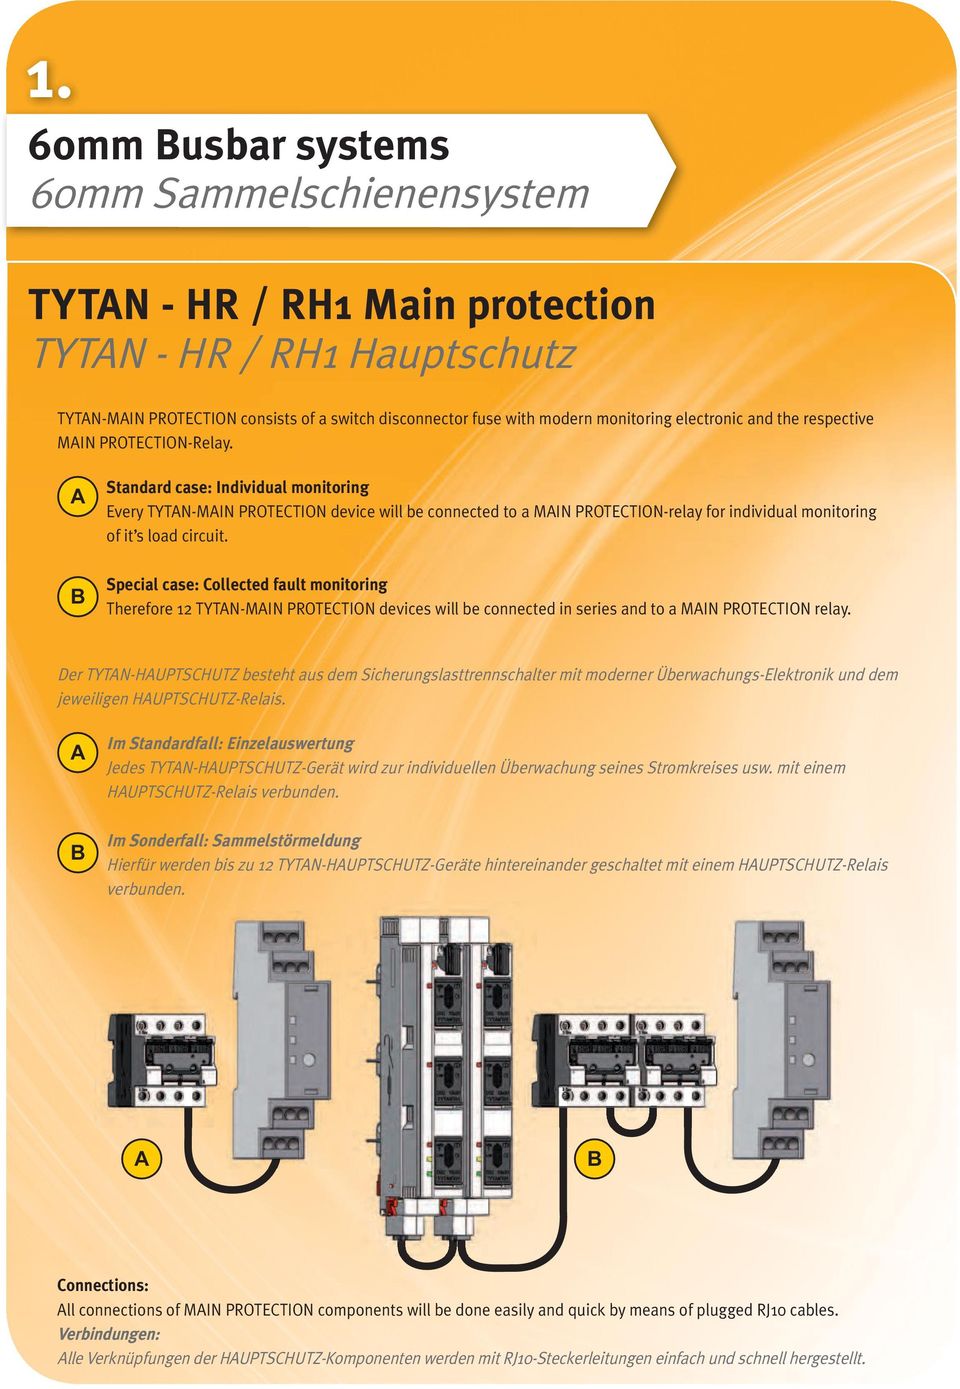 A B Standard case: Individual monitoring Every TYTAN-MAIN PROTECTION device will be connected to a MAIN PROTECTION-relay for individual monitoring of it s load circuit.